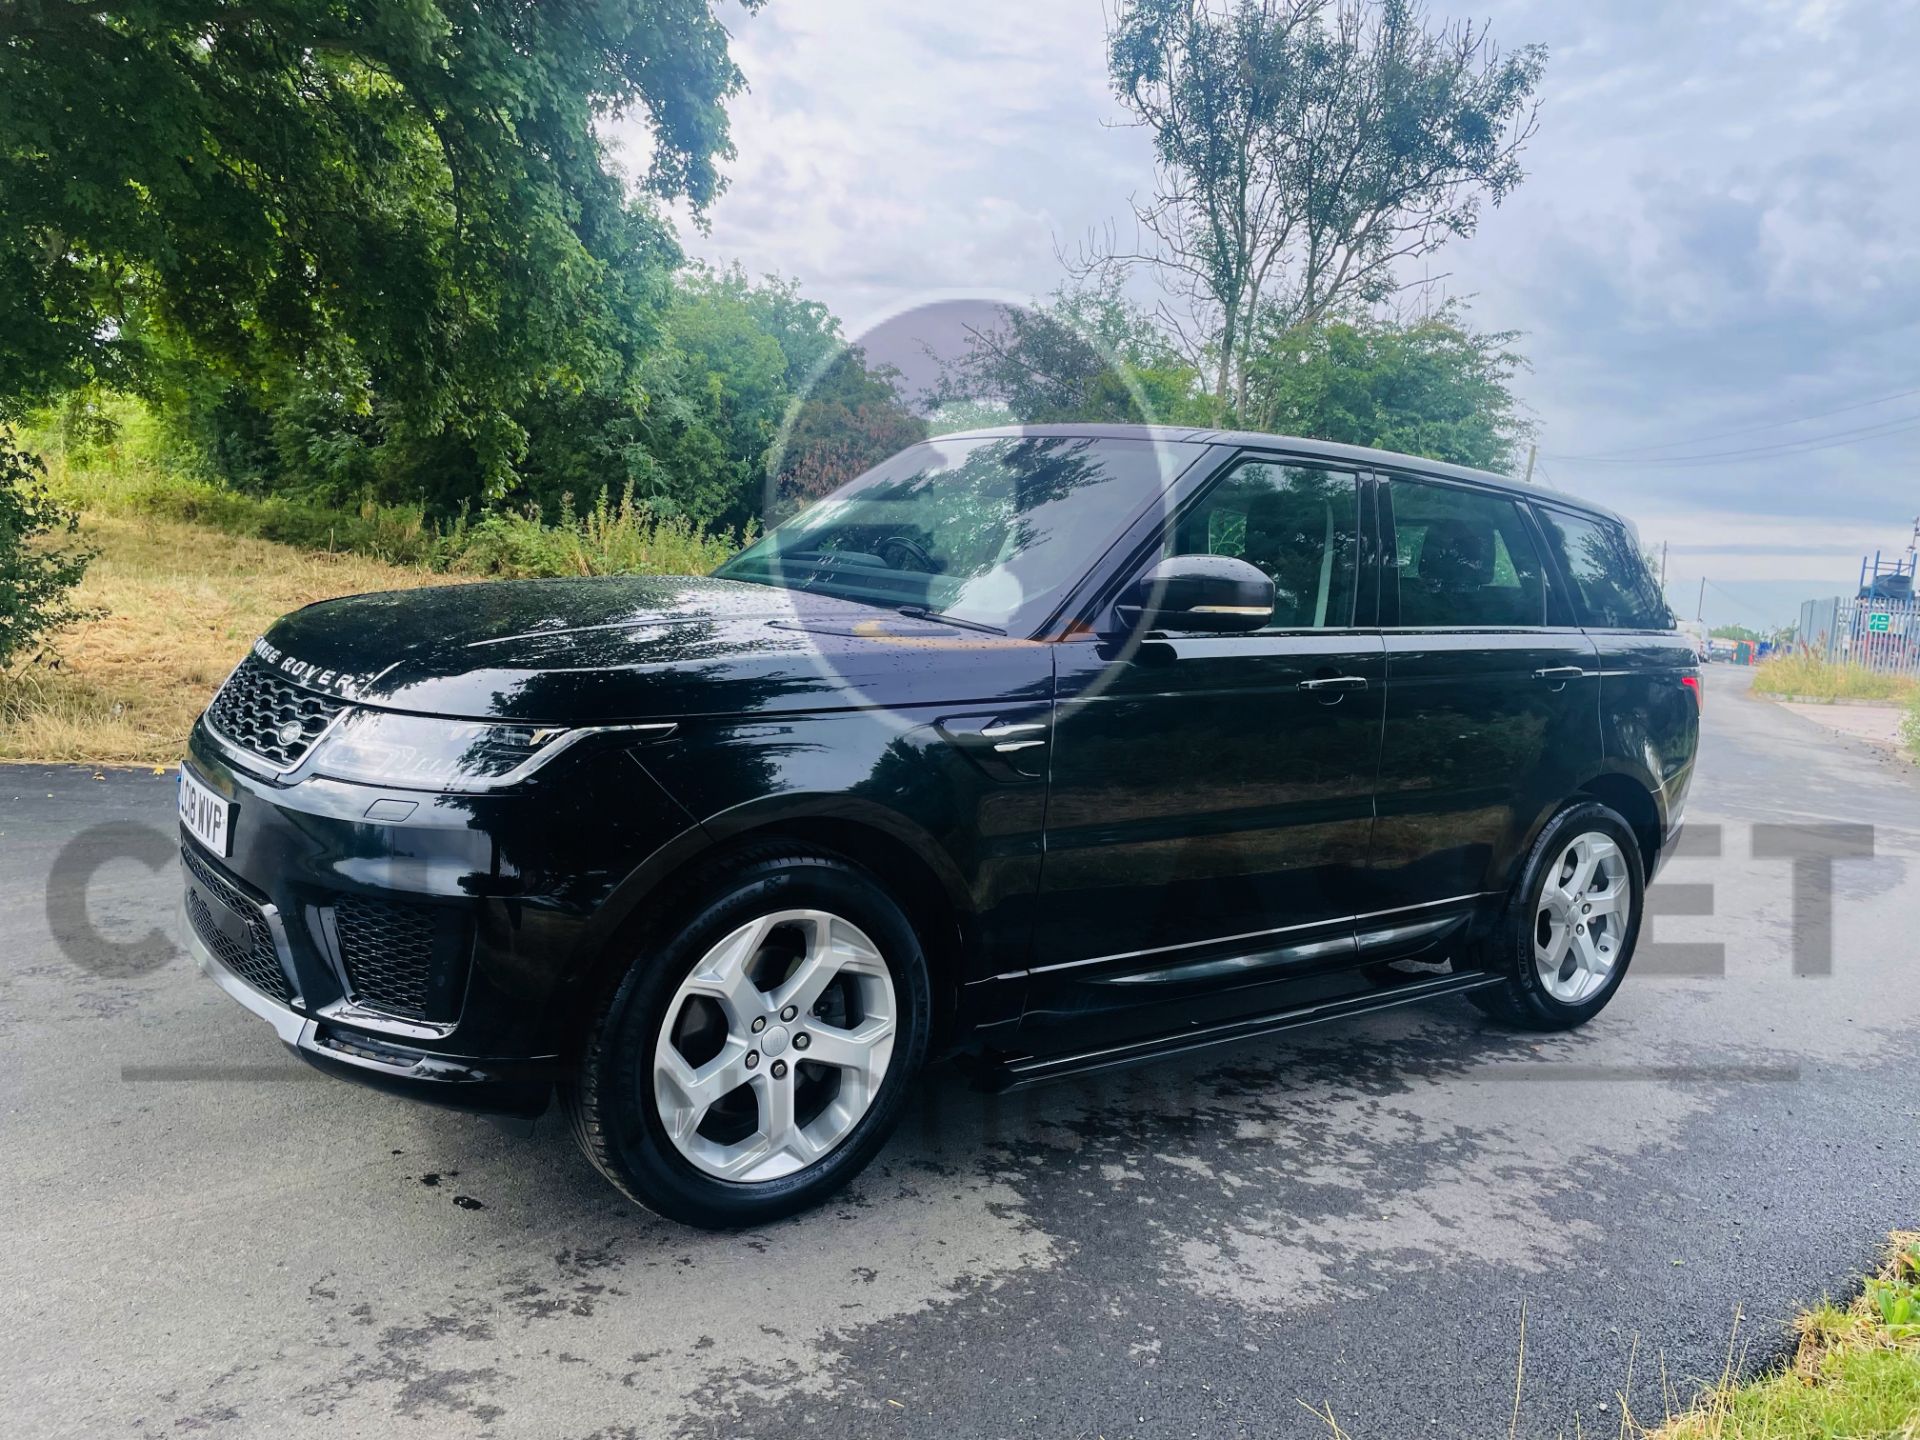 RANGE ROVER SPORT *HSE EDITION* SUV (2018 - NEW MODEL) EURO 6 DIESEL - 8 SPEED AUTOMATIC *HUGE SPEC* - Image 7 of 60